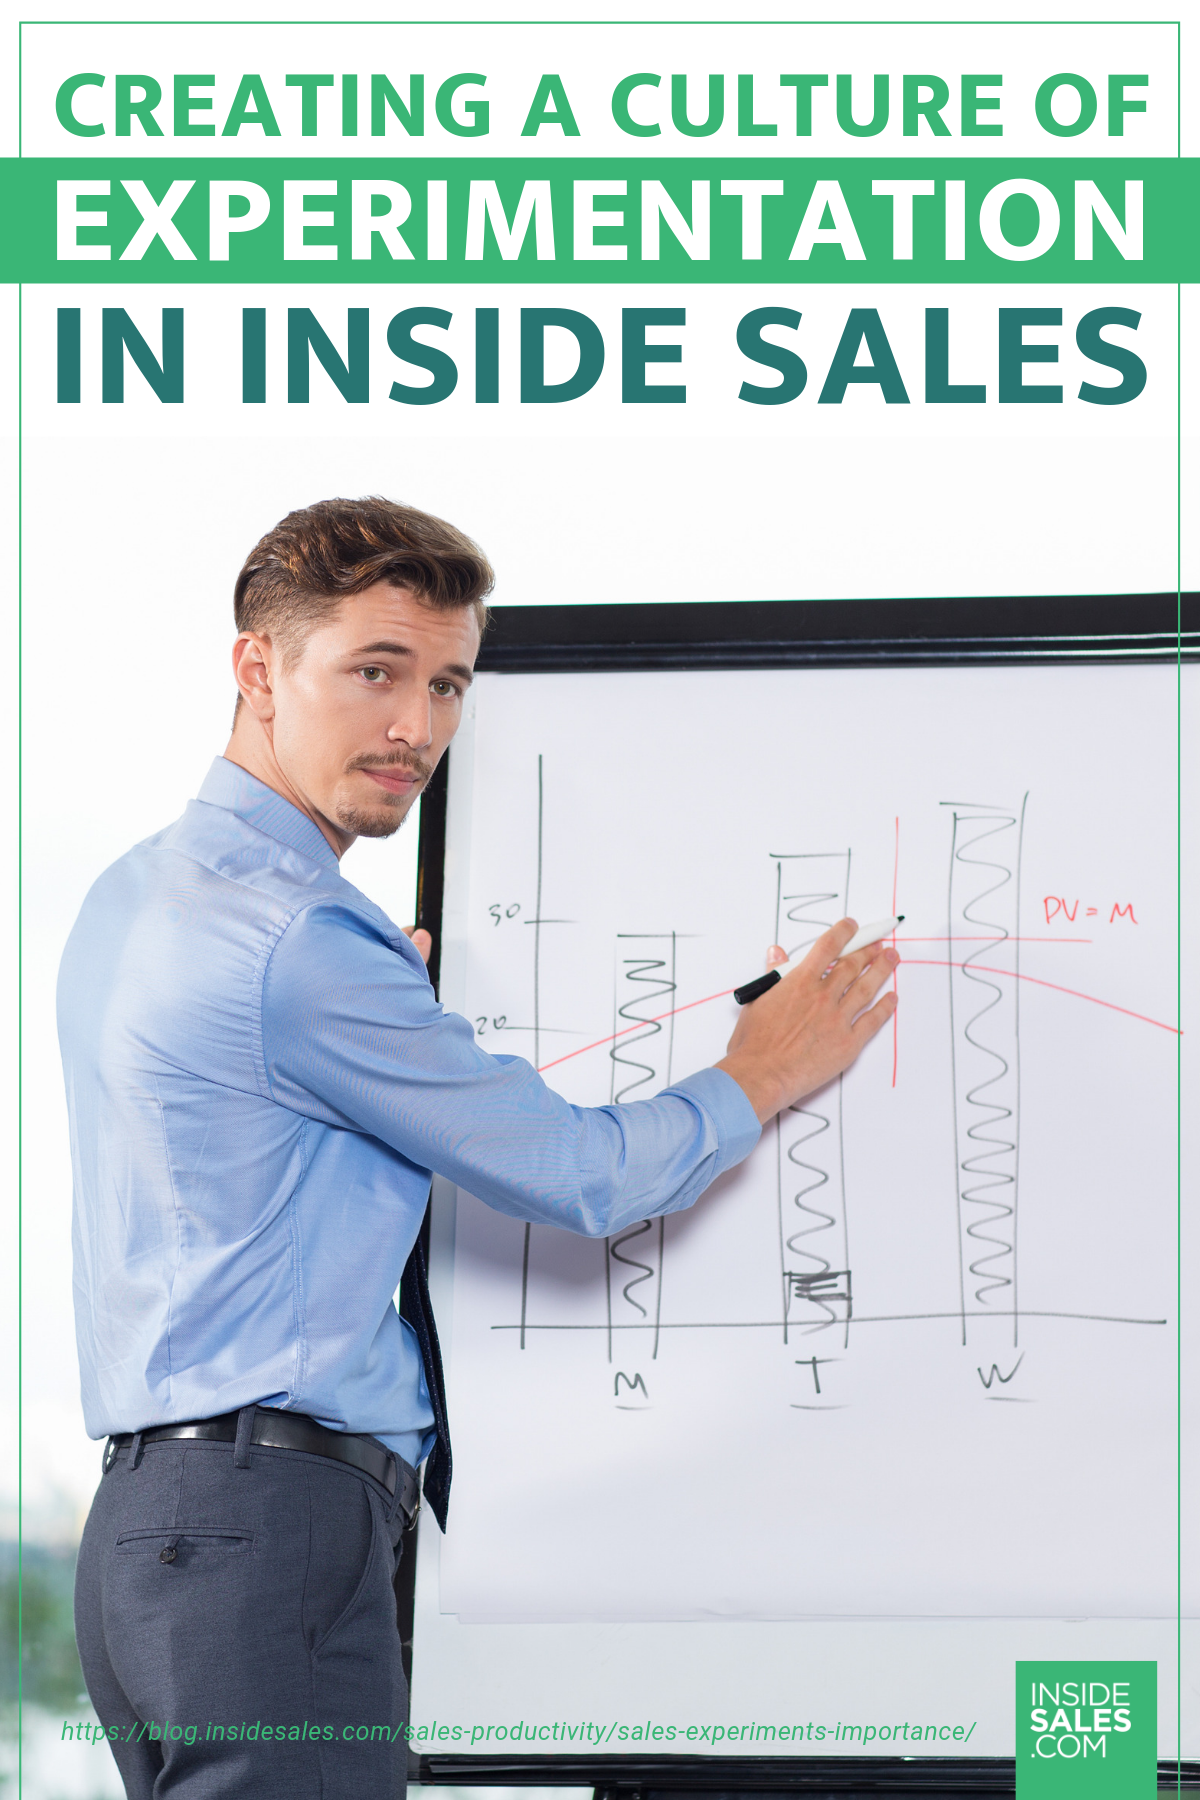 Creating A Culture Of Experimentation In Inside Sales https://resources.insidesales.com/blog/sales-productivity/sales-experiments-importance/